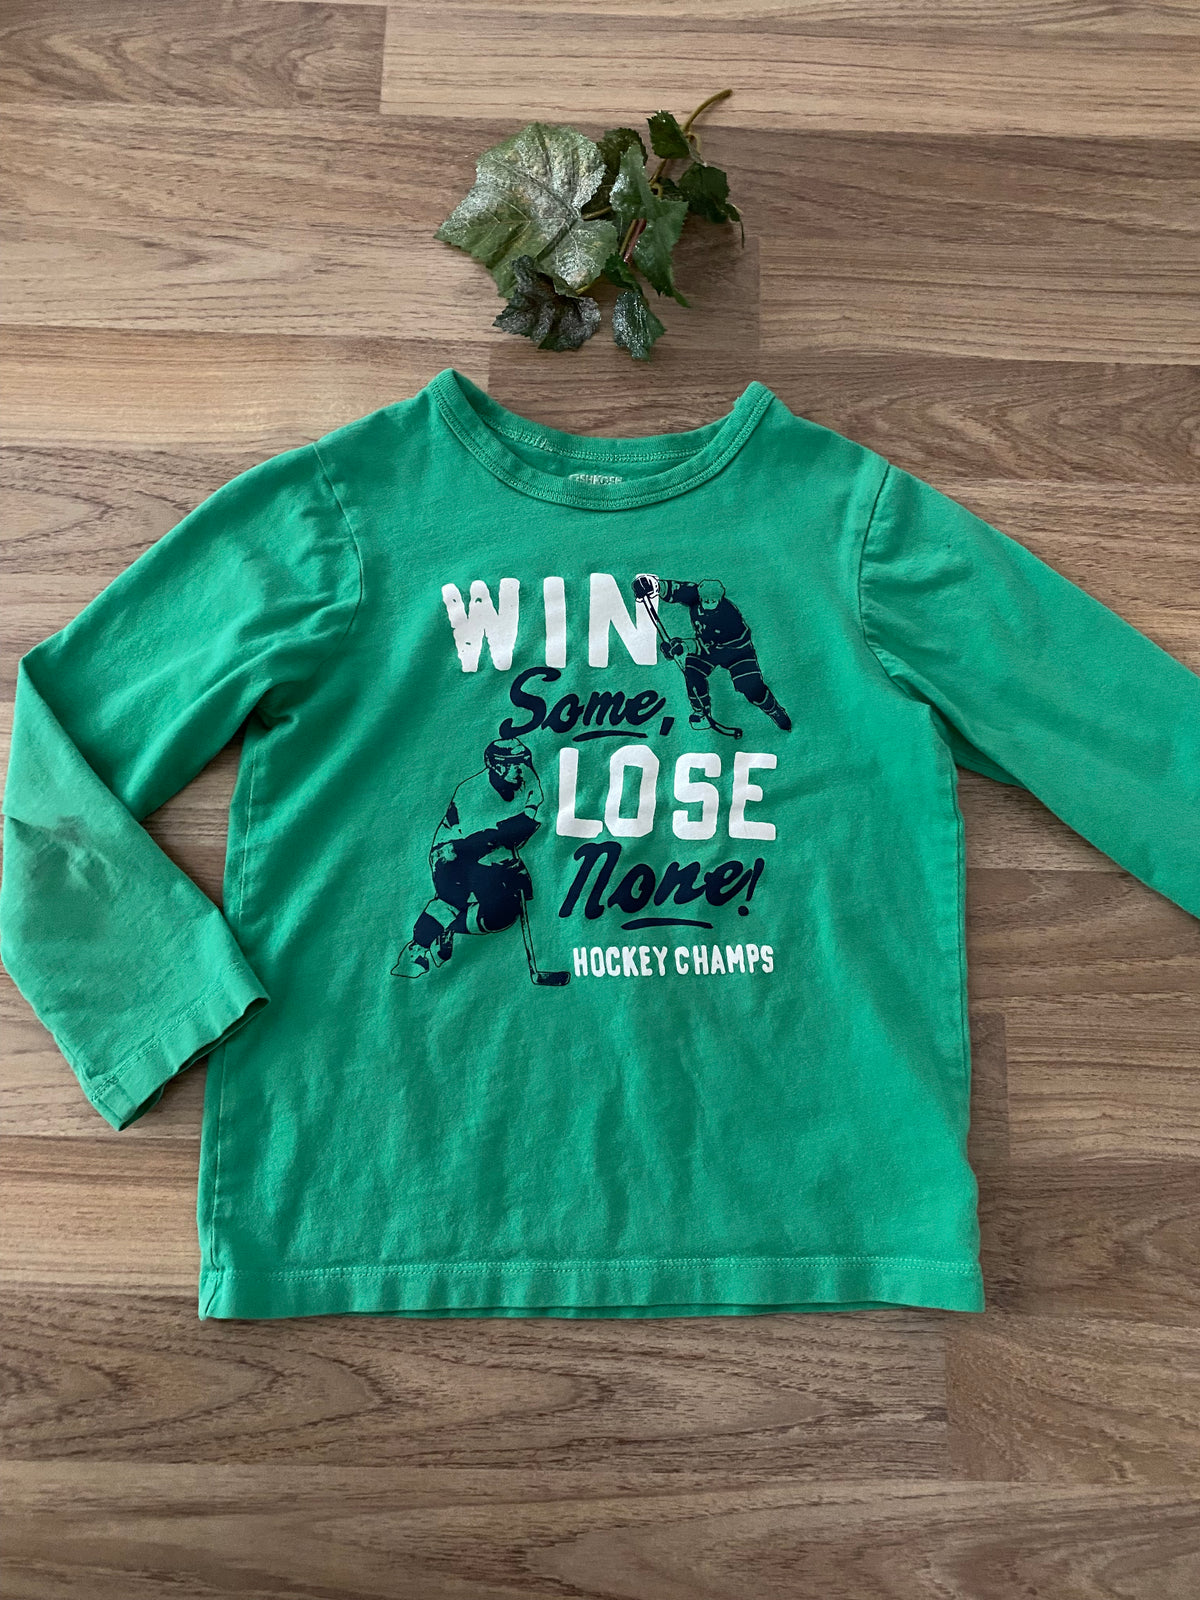 Long Sleeve Graphic Top (Boys Size 5)